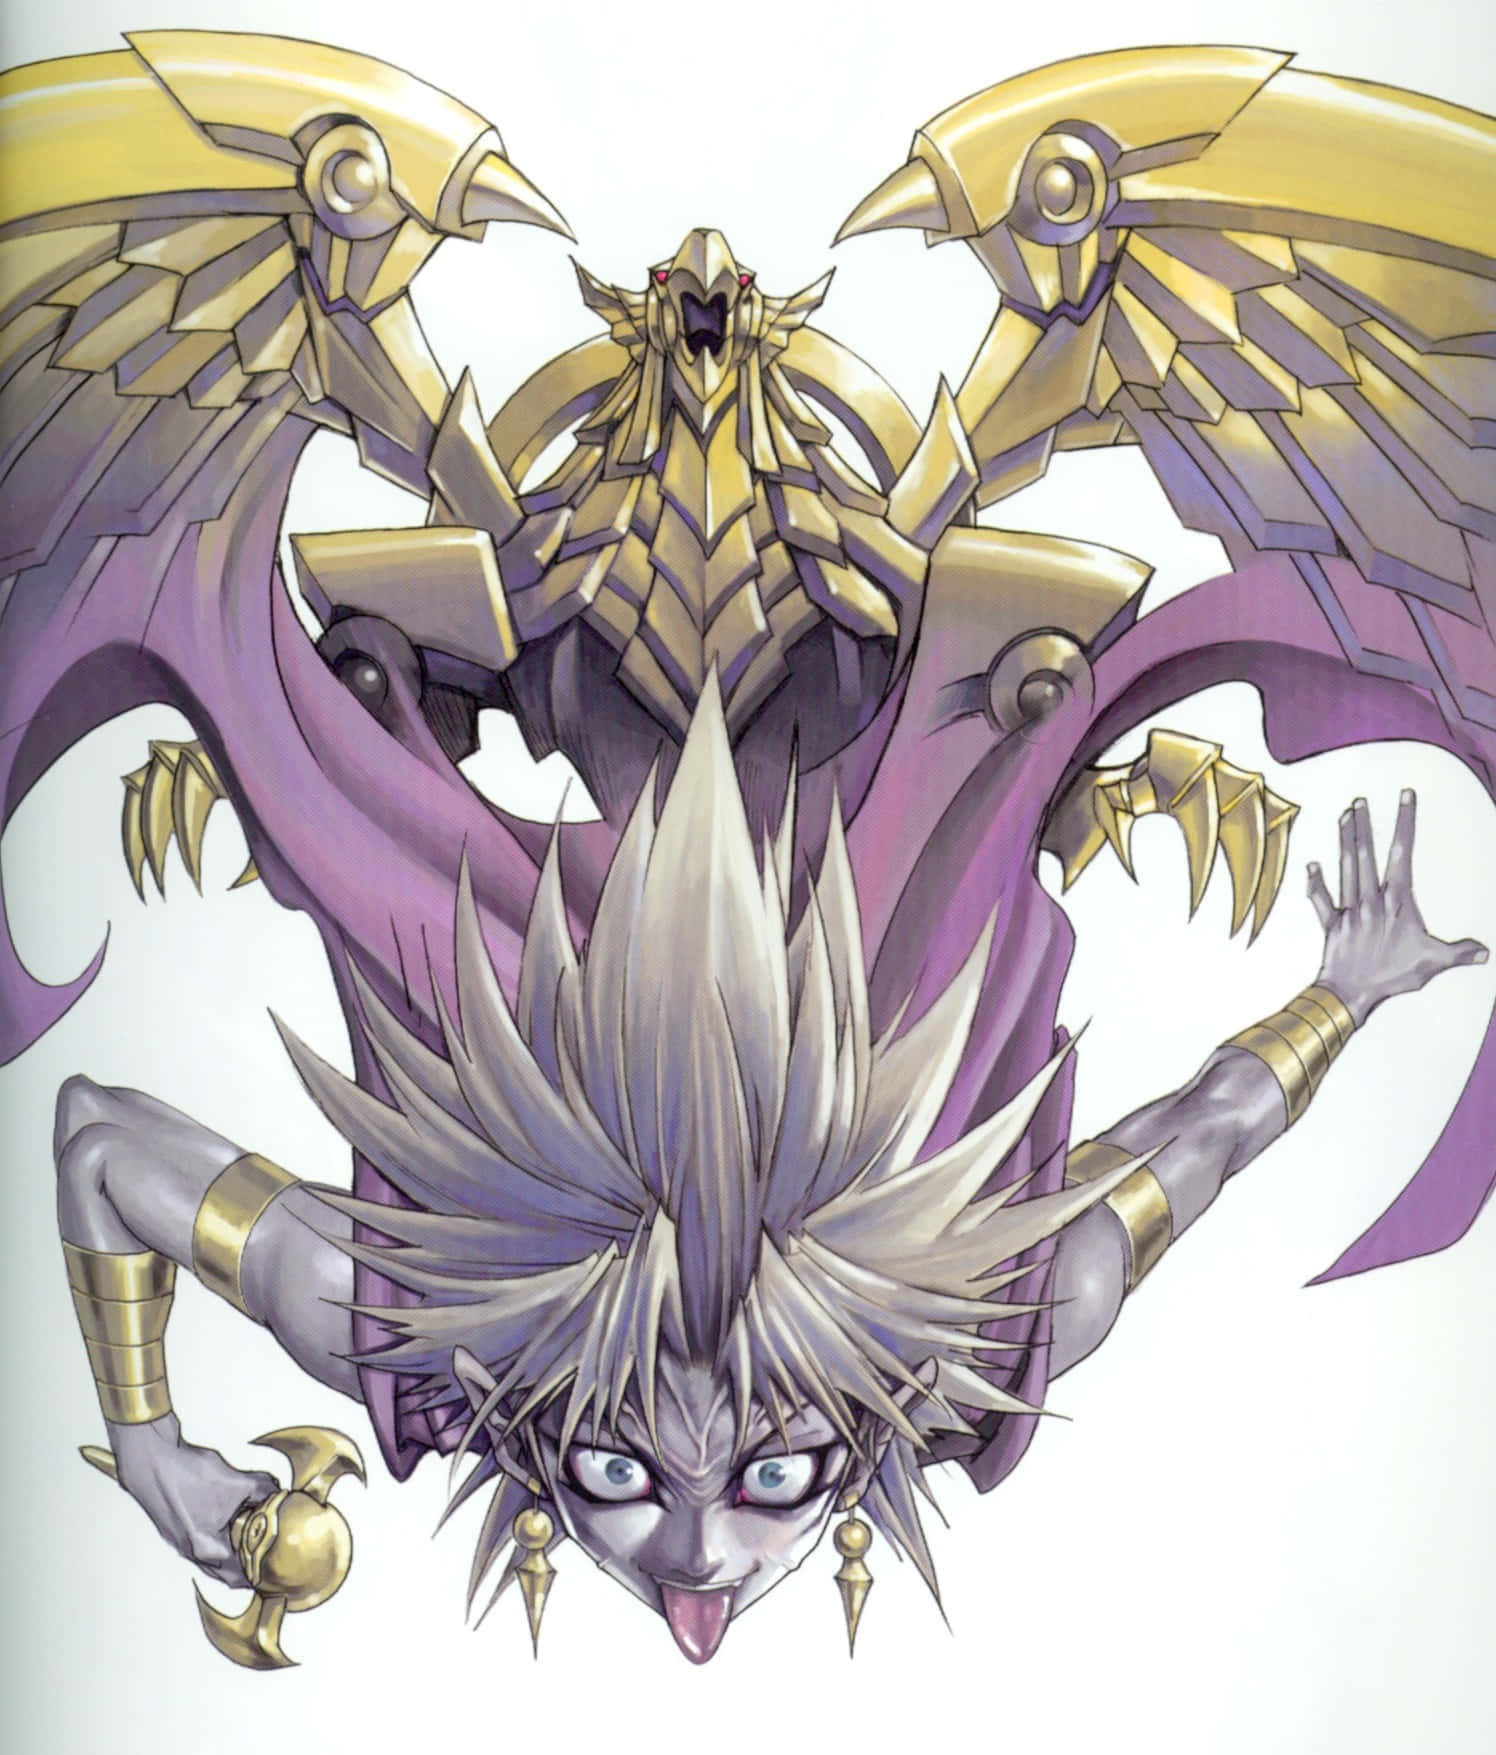 Marik Ishtar standing confidently with arms crossed Wallpaper